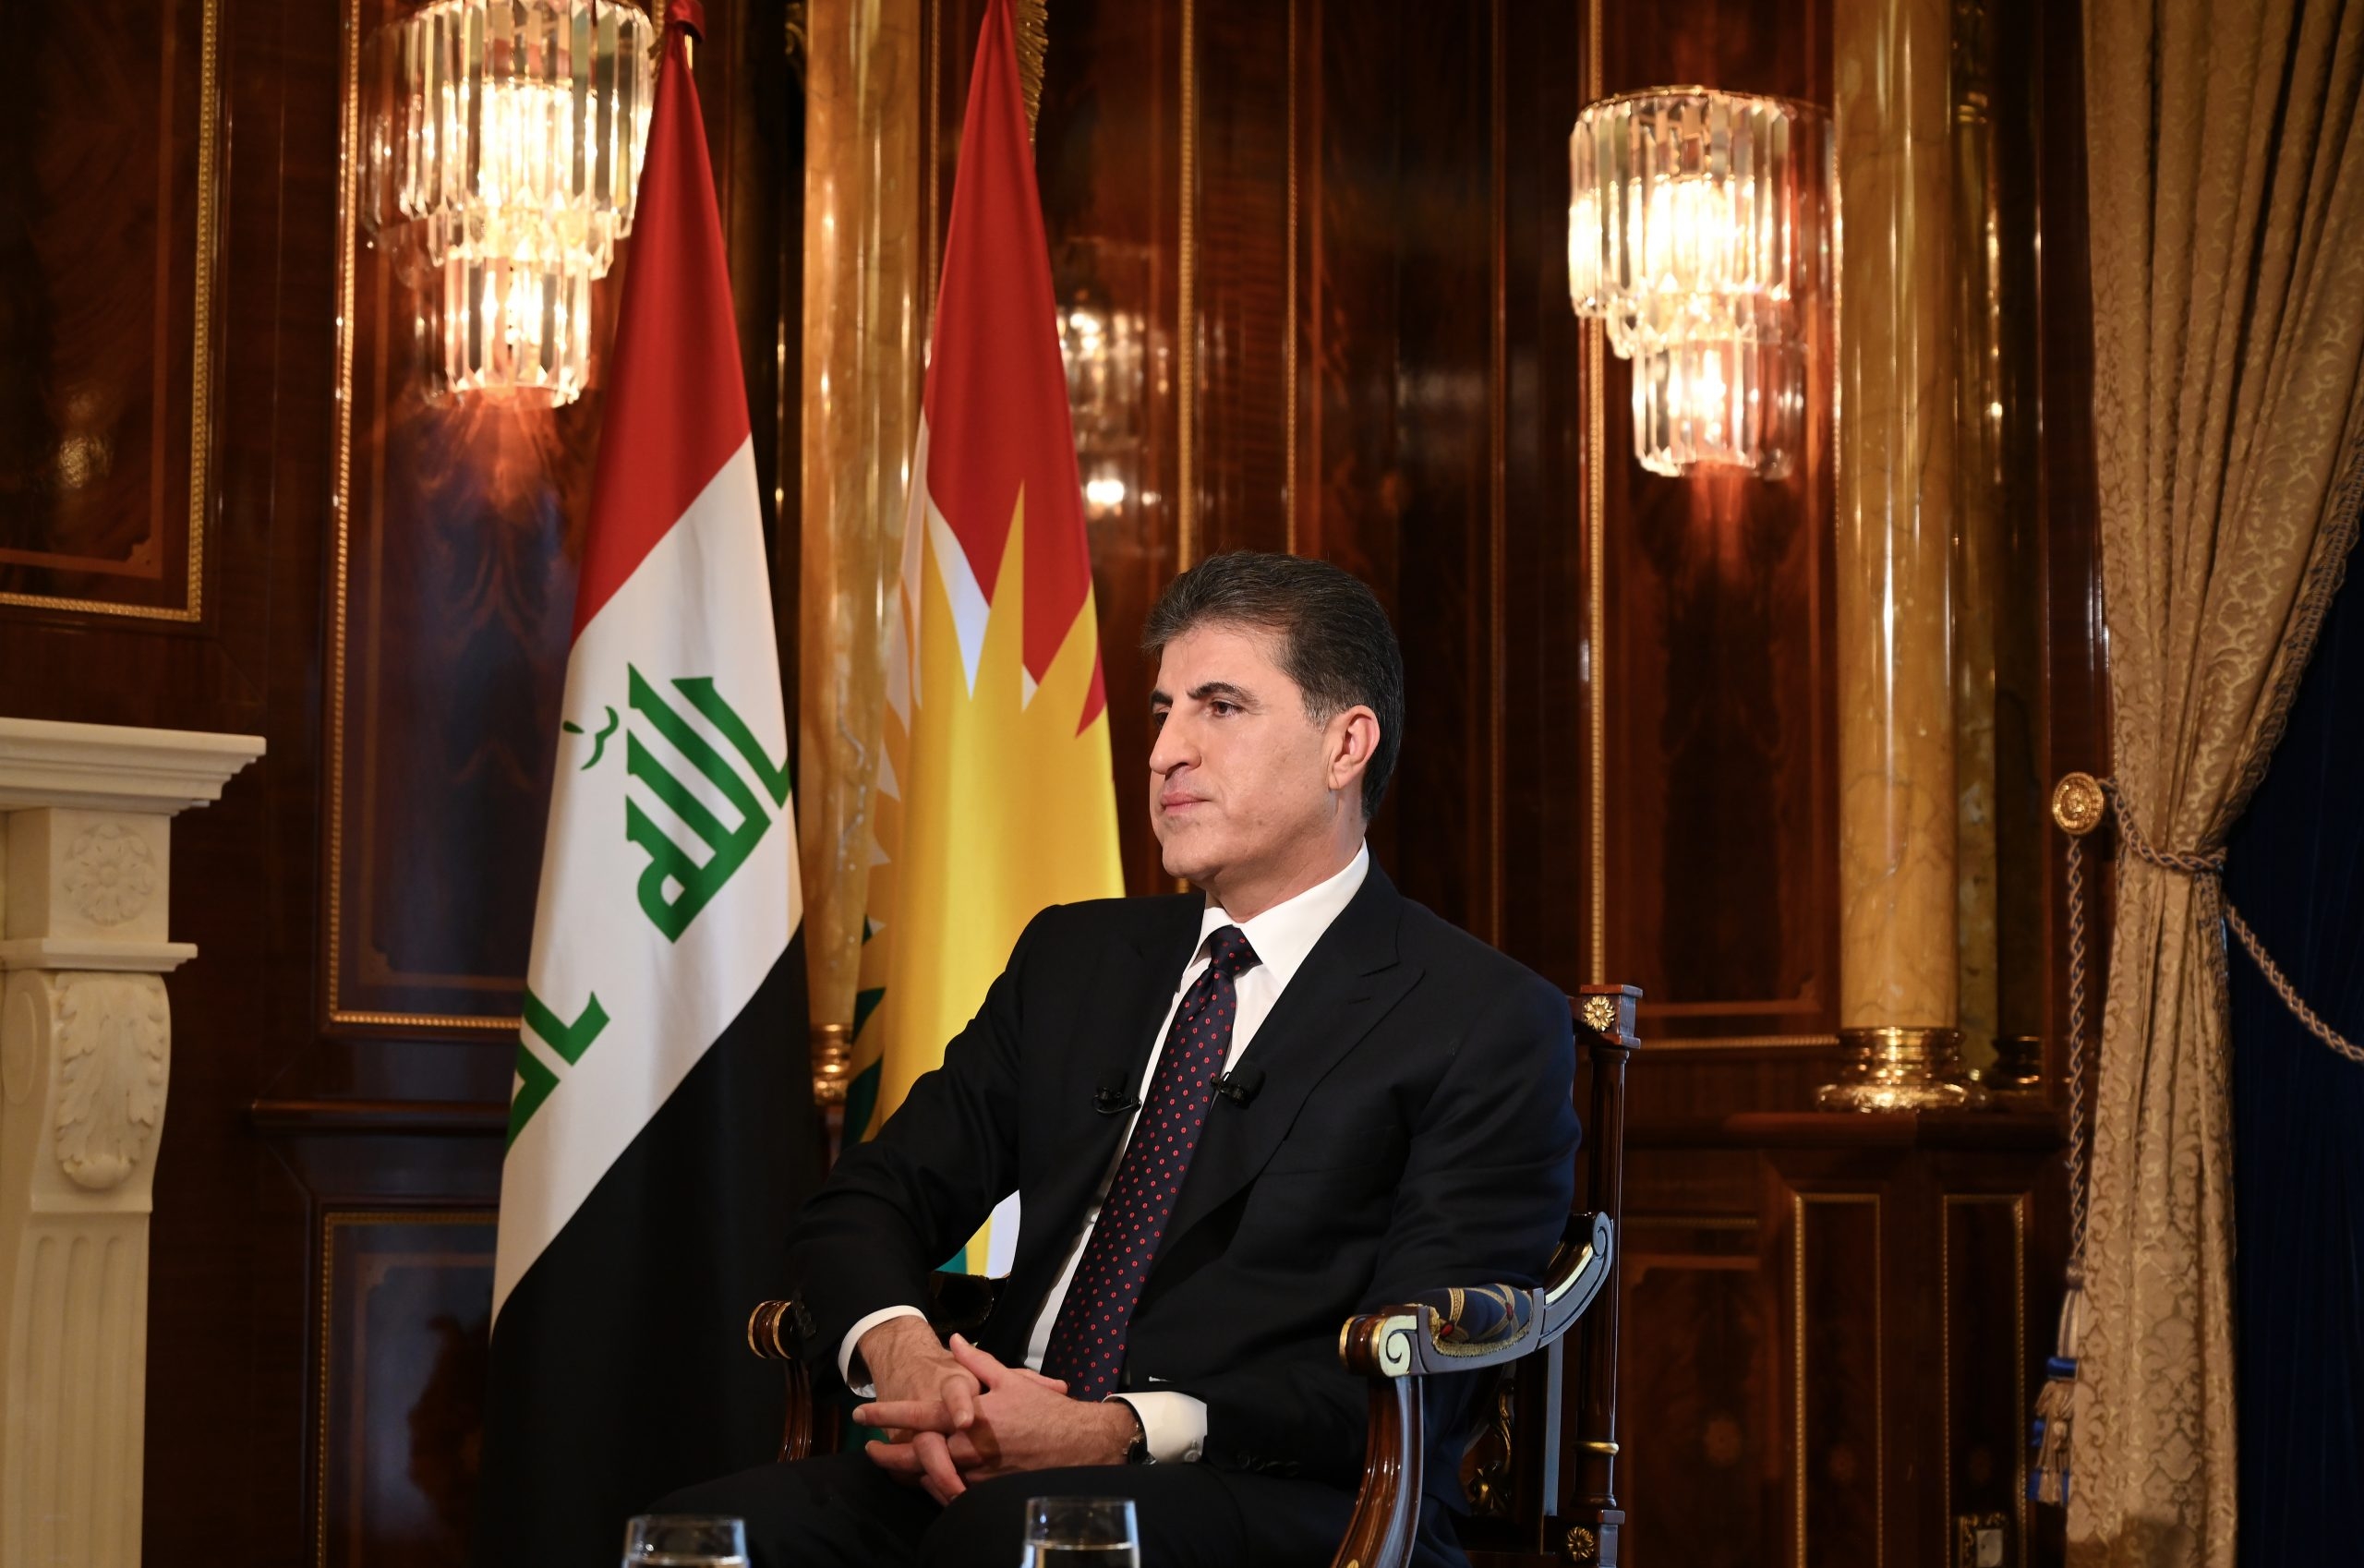 President Nechirvan Barzani: The failure to implement federalism is the source of Iraq’s problems